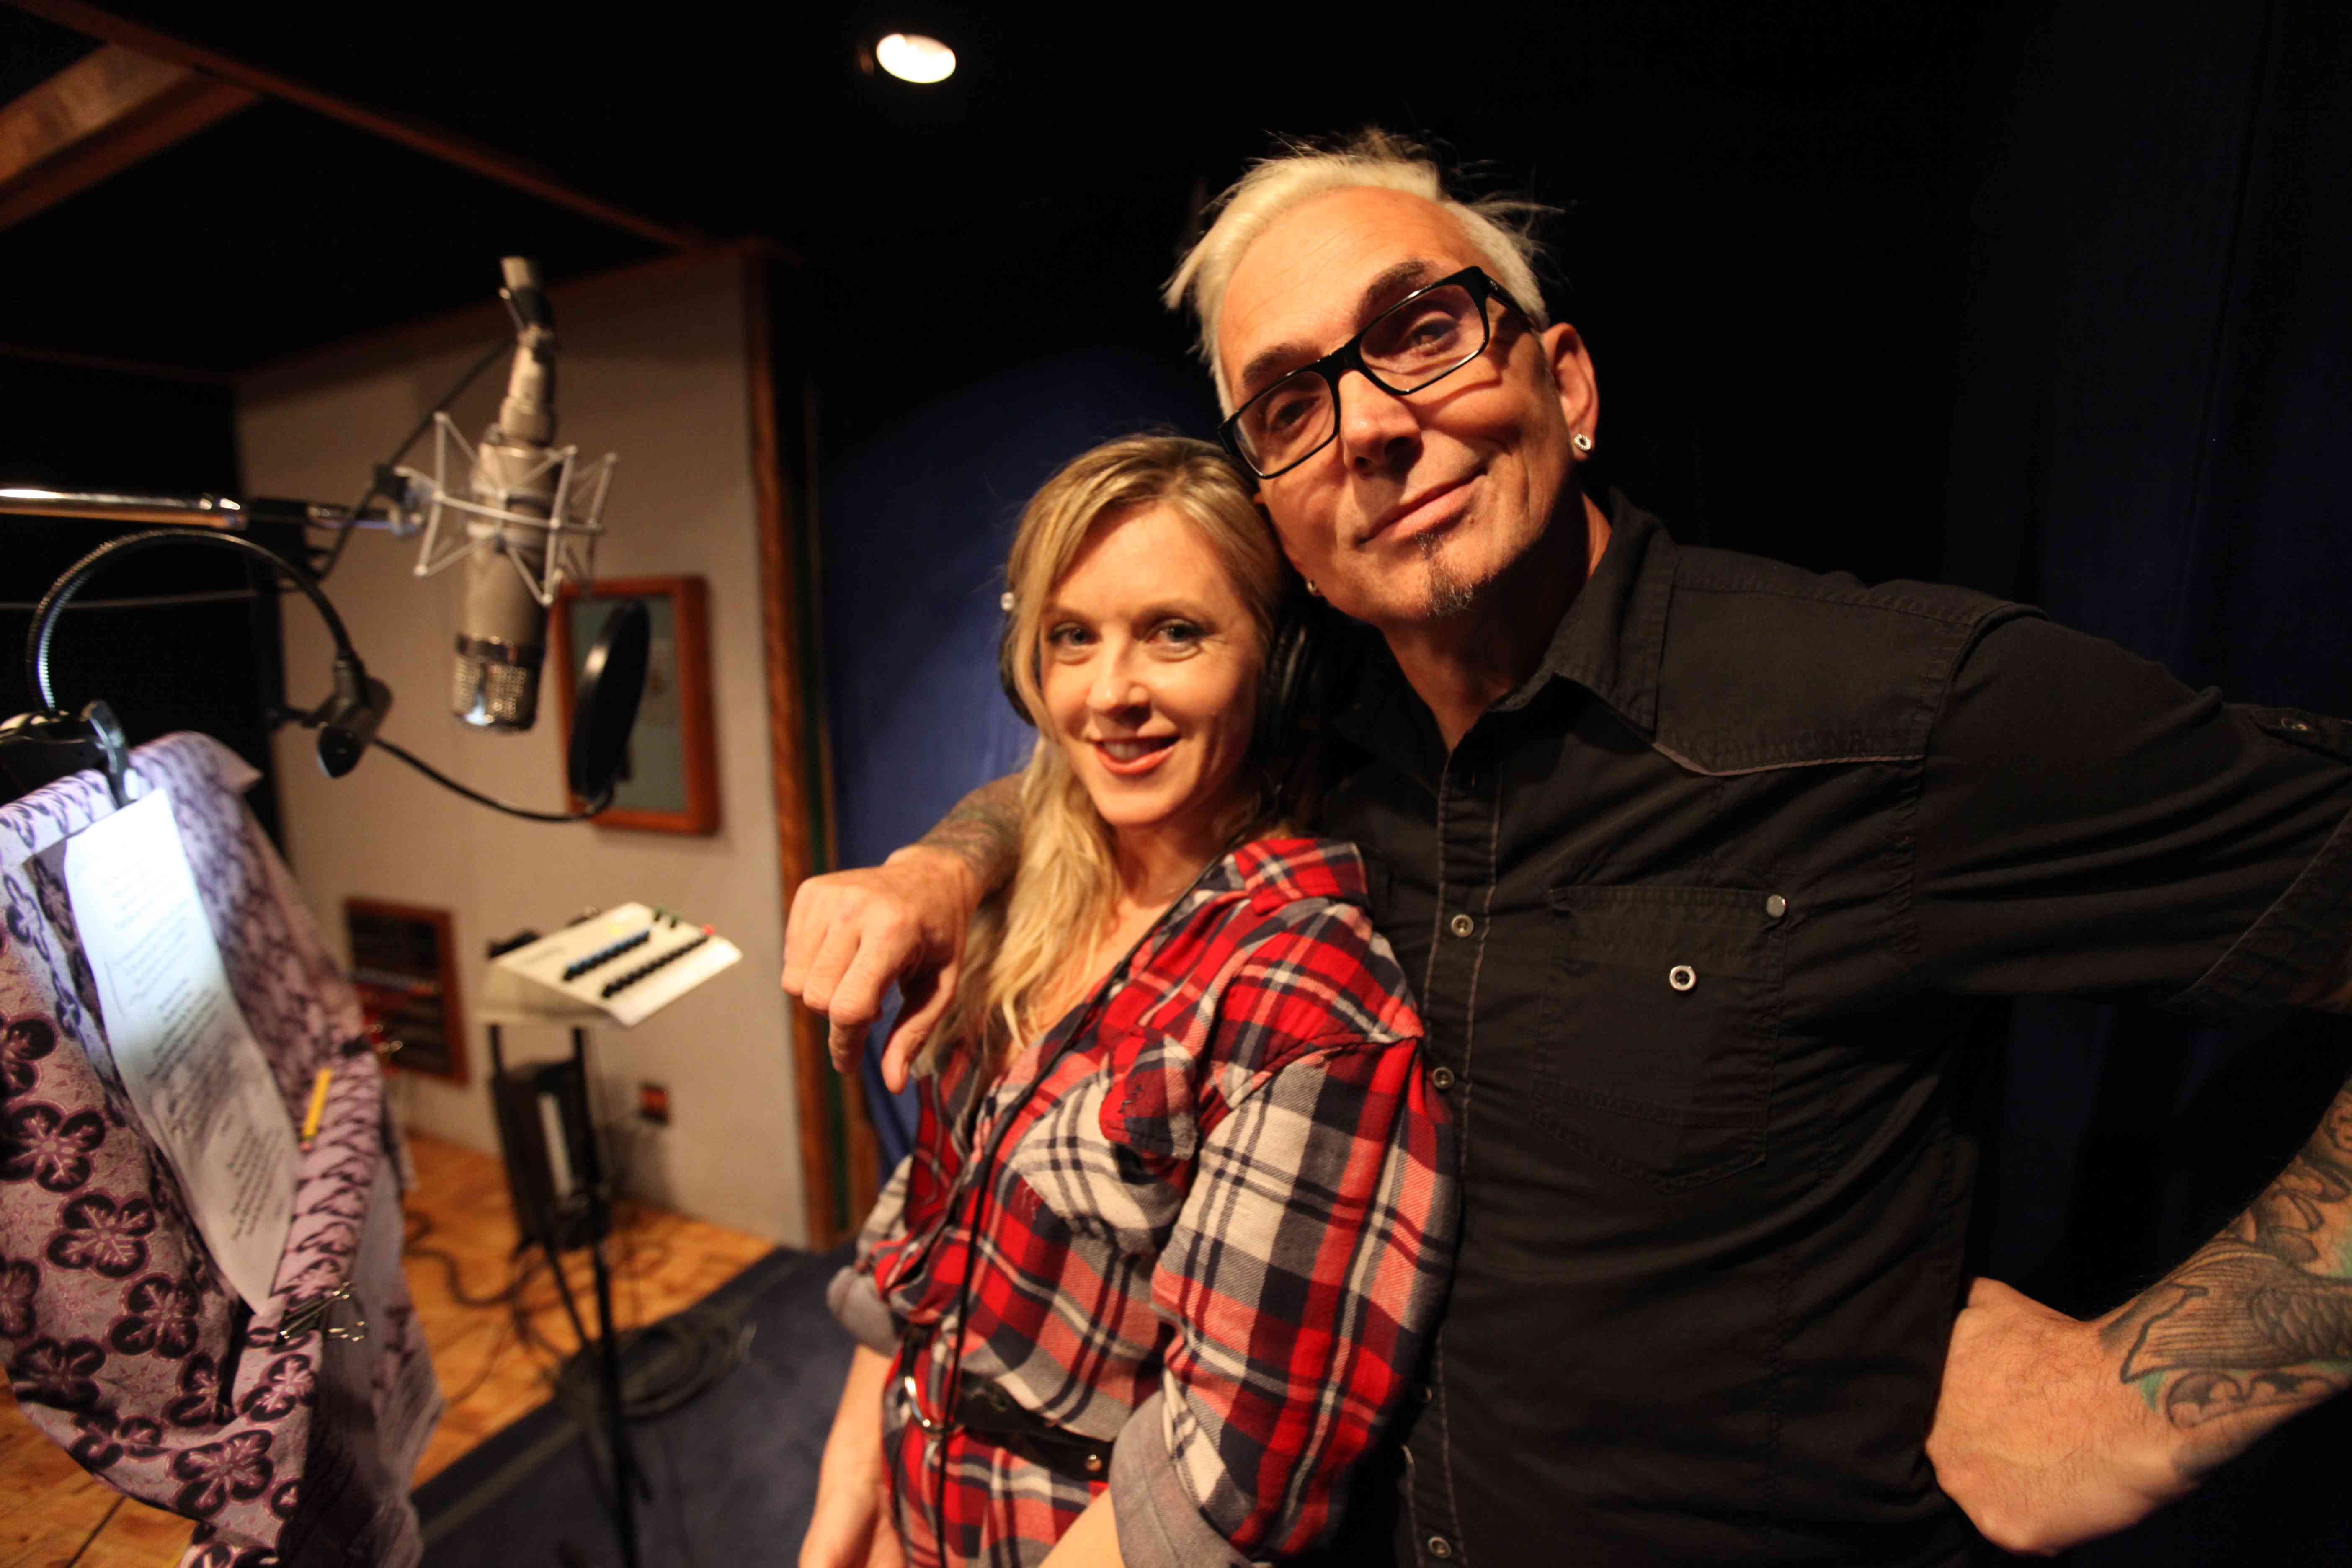 "This Land is Your Land" performed by Liz Phair and Everclear for upcoming documentary FARMLAND, in theatres May 1st. Photo credit: Chelsea Lauren